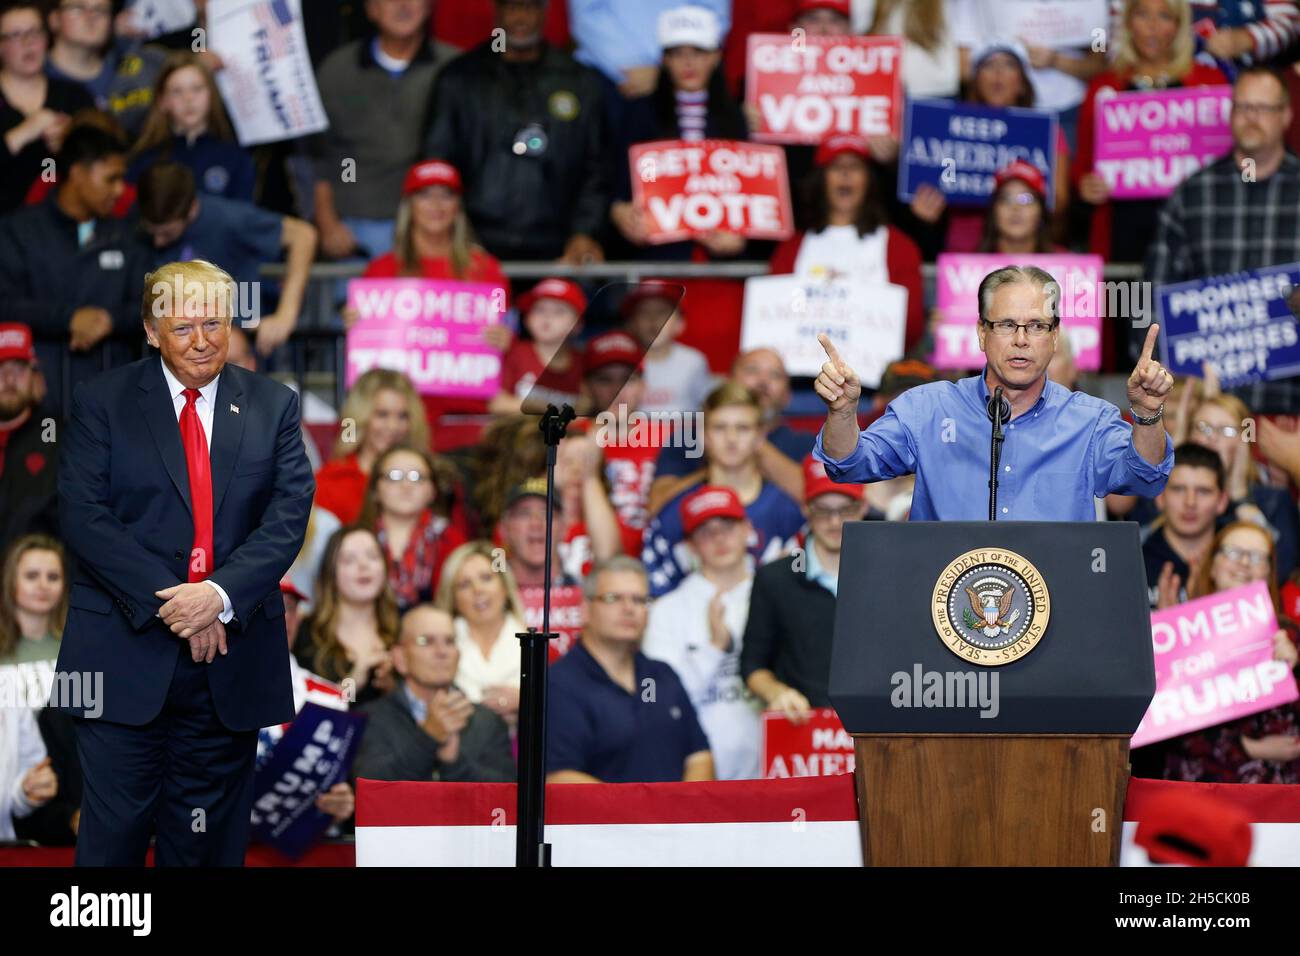 11052018 - Fort Wayne, Indiana, USA: Mike Braun, who is running for senate, appears onstage with United States President Donald J. Trump who is campaigning for Indiana congressional candidates during a Make America Great Again! rally at the Allen County War Memorial Coliseum in Fort Wayne, Indiana. Stock Photo